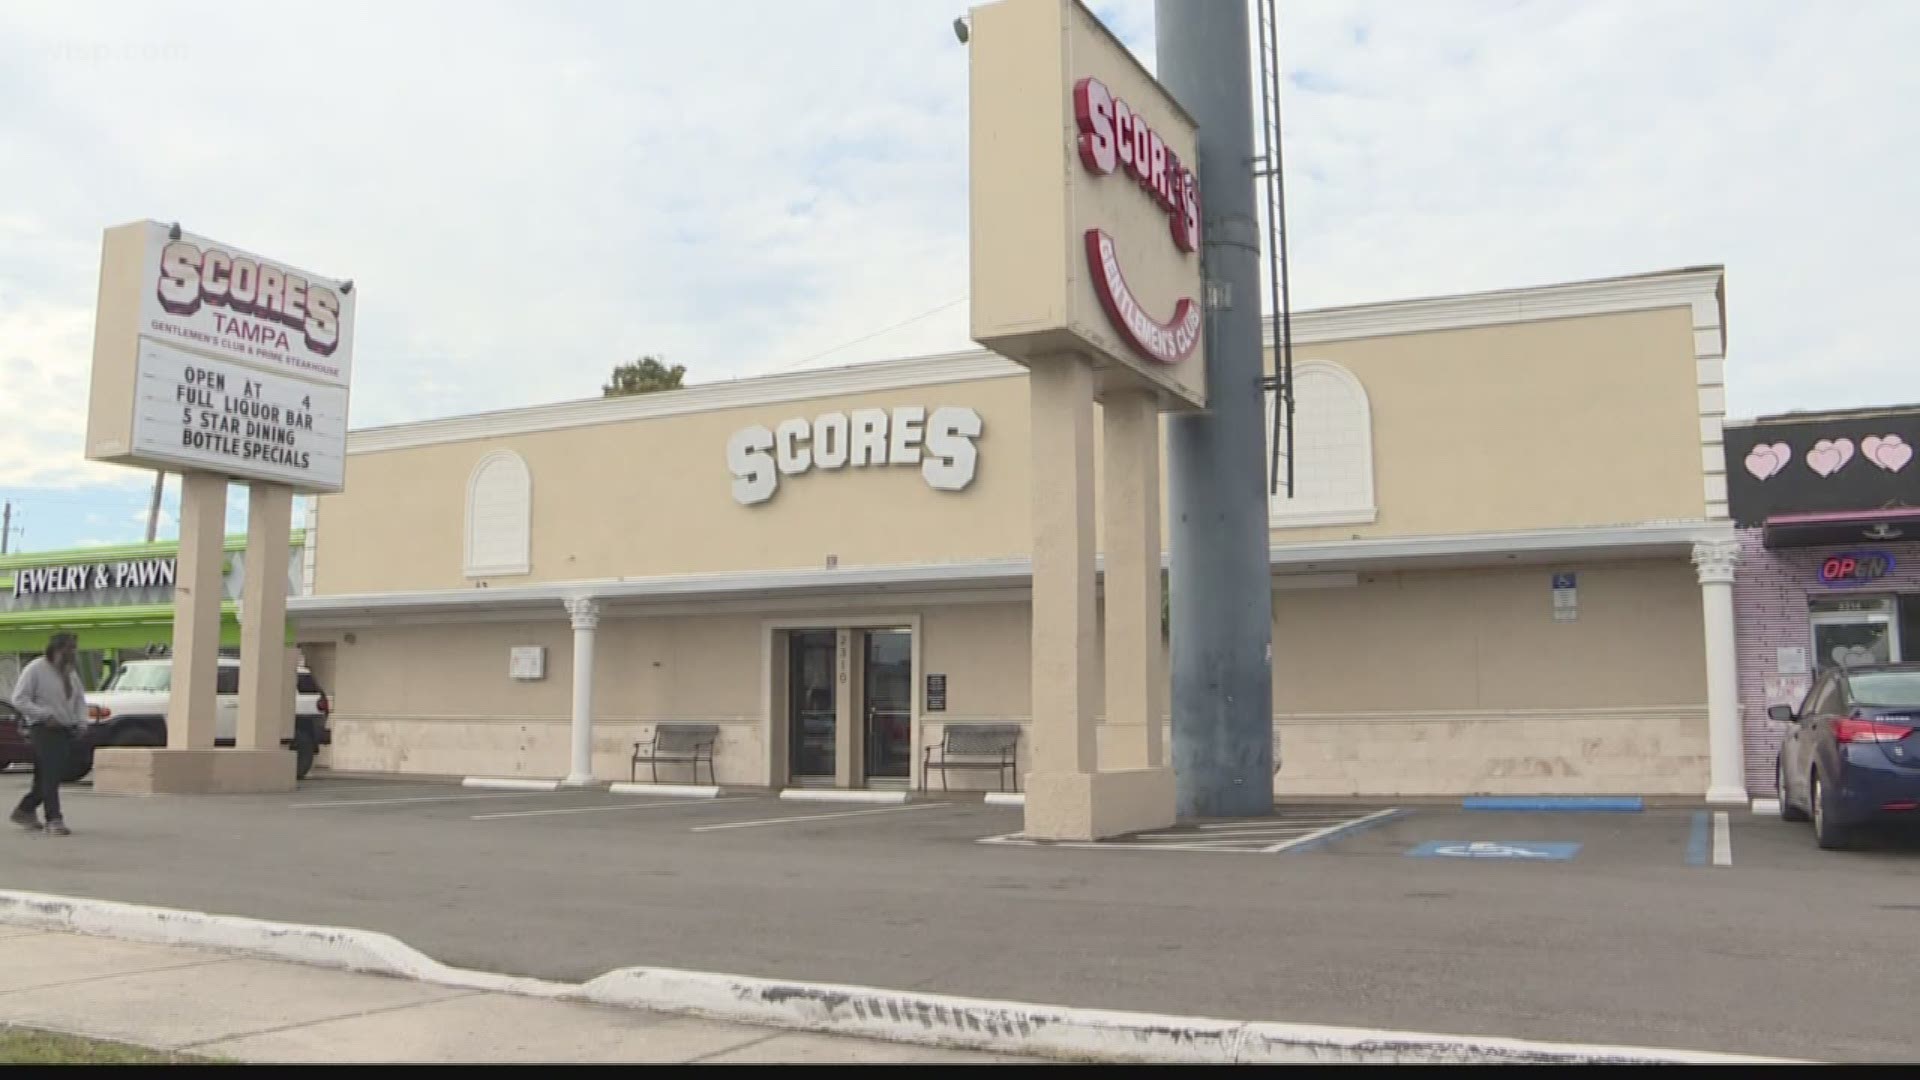 The case filed in circuit court says a Scores Gentlemen's Club in Tampa illegally employed a minor with disabilities.